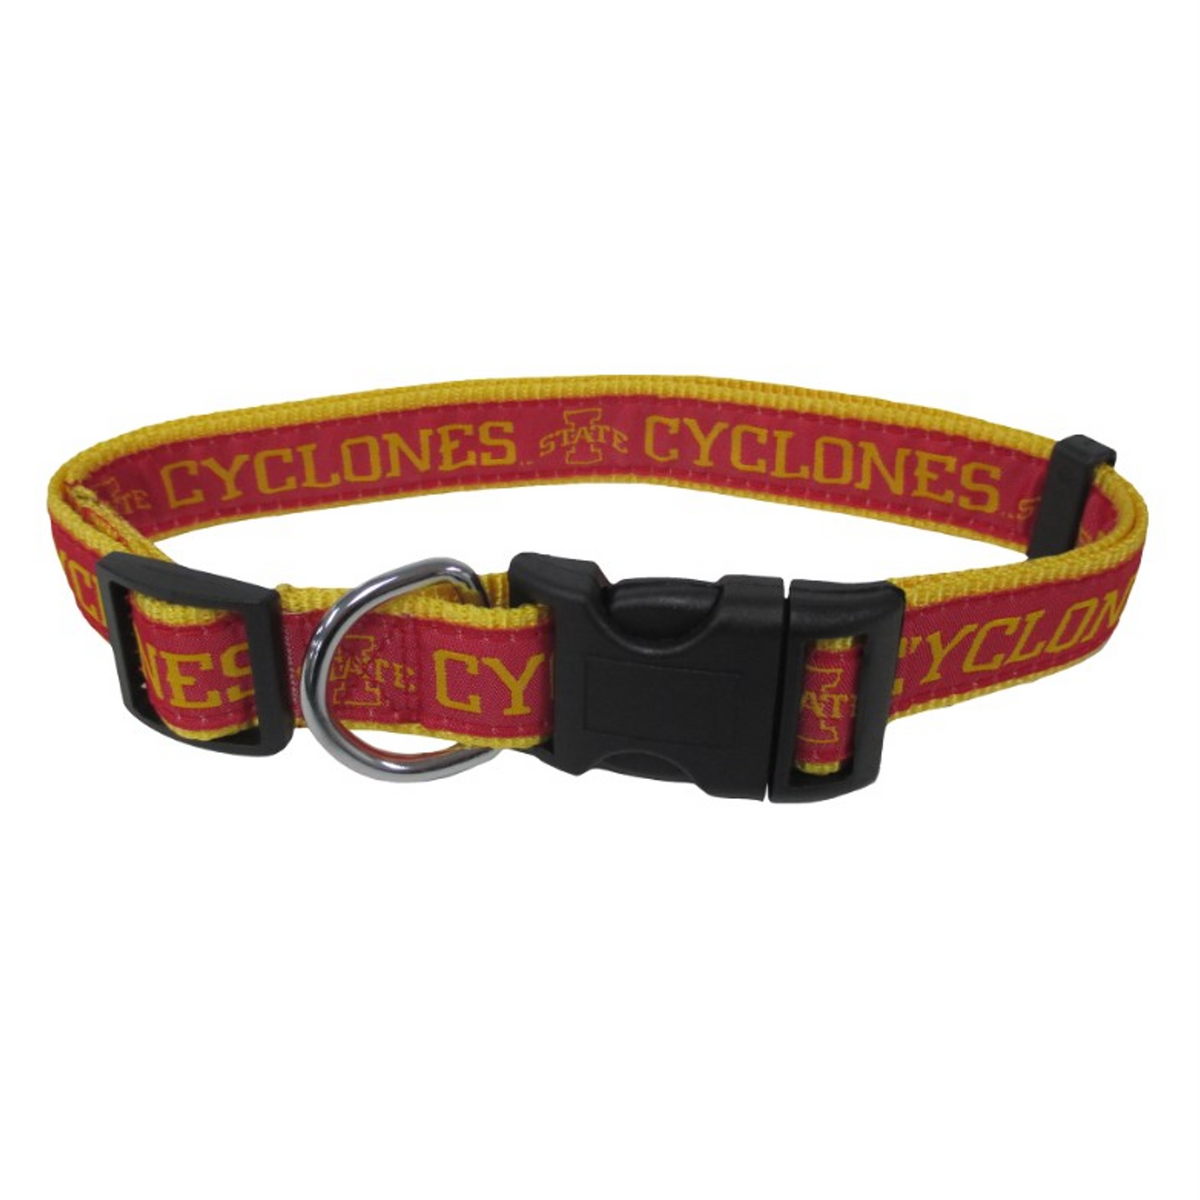 IA State Cyclones Dog Collar - 3 Red Rovers